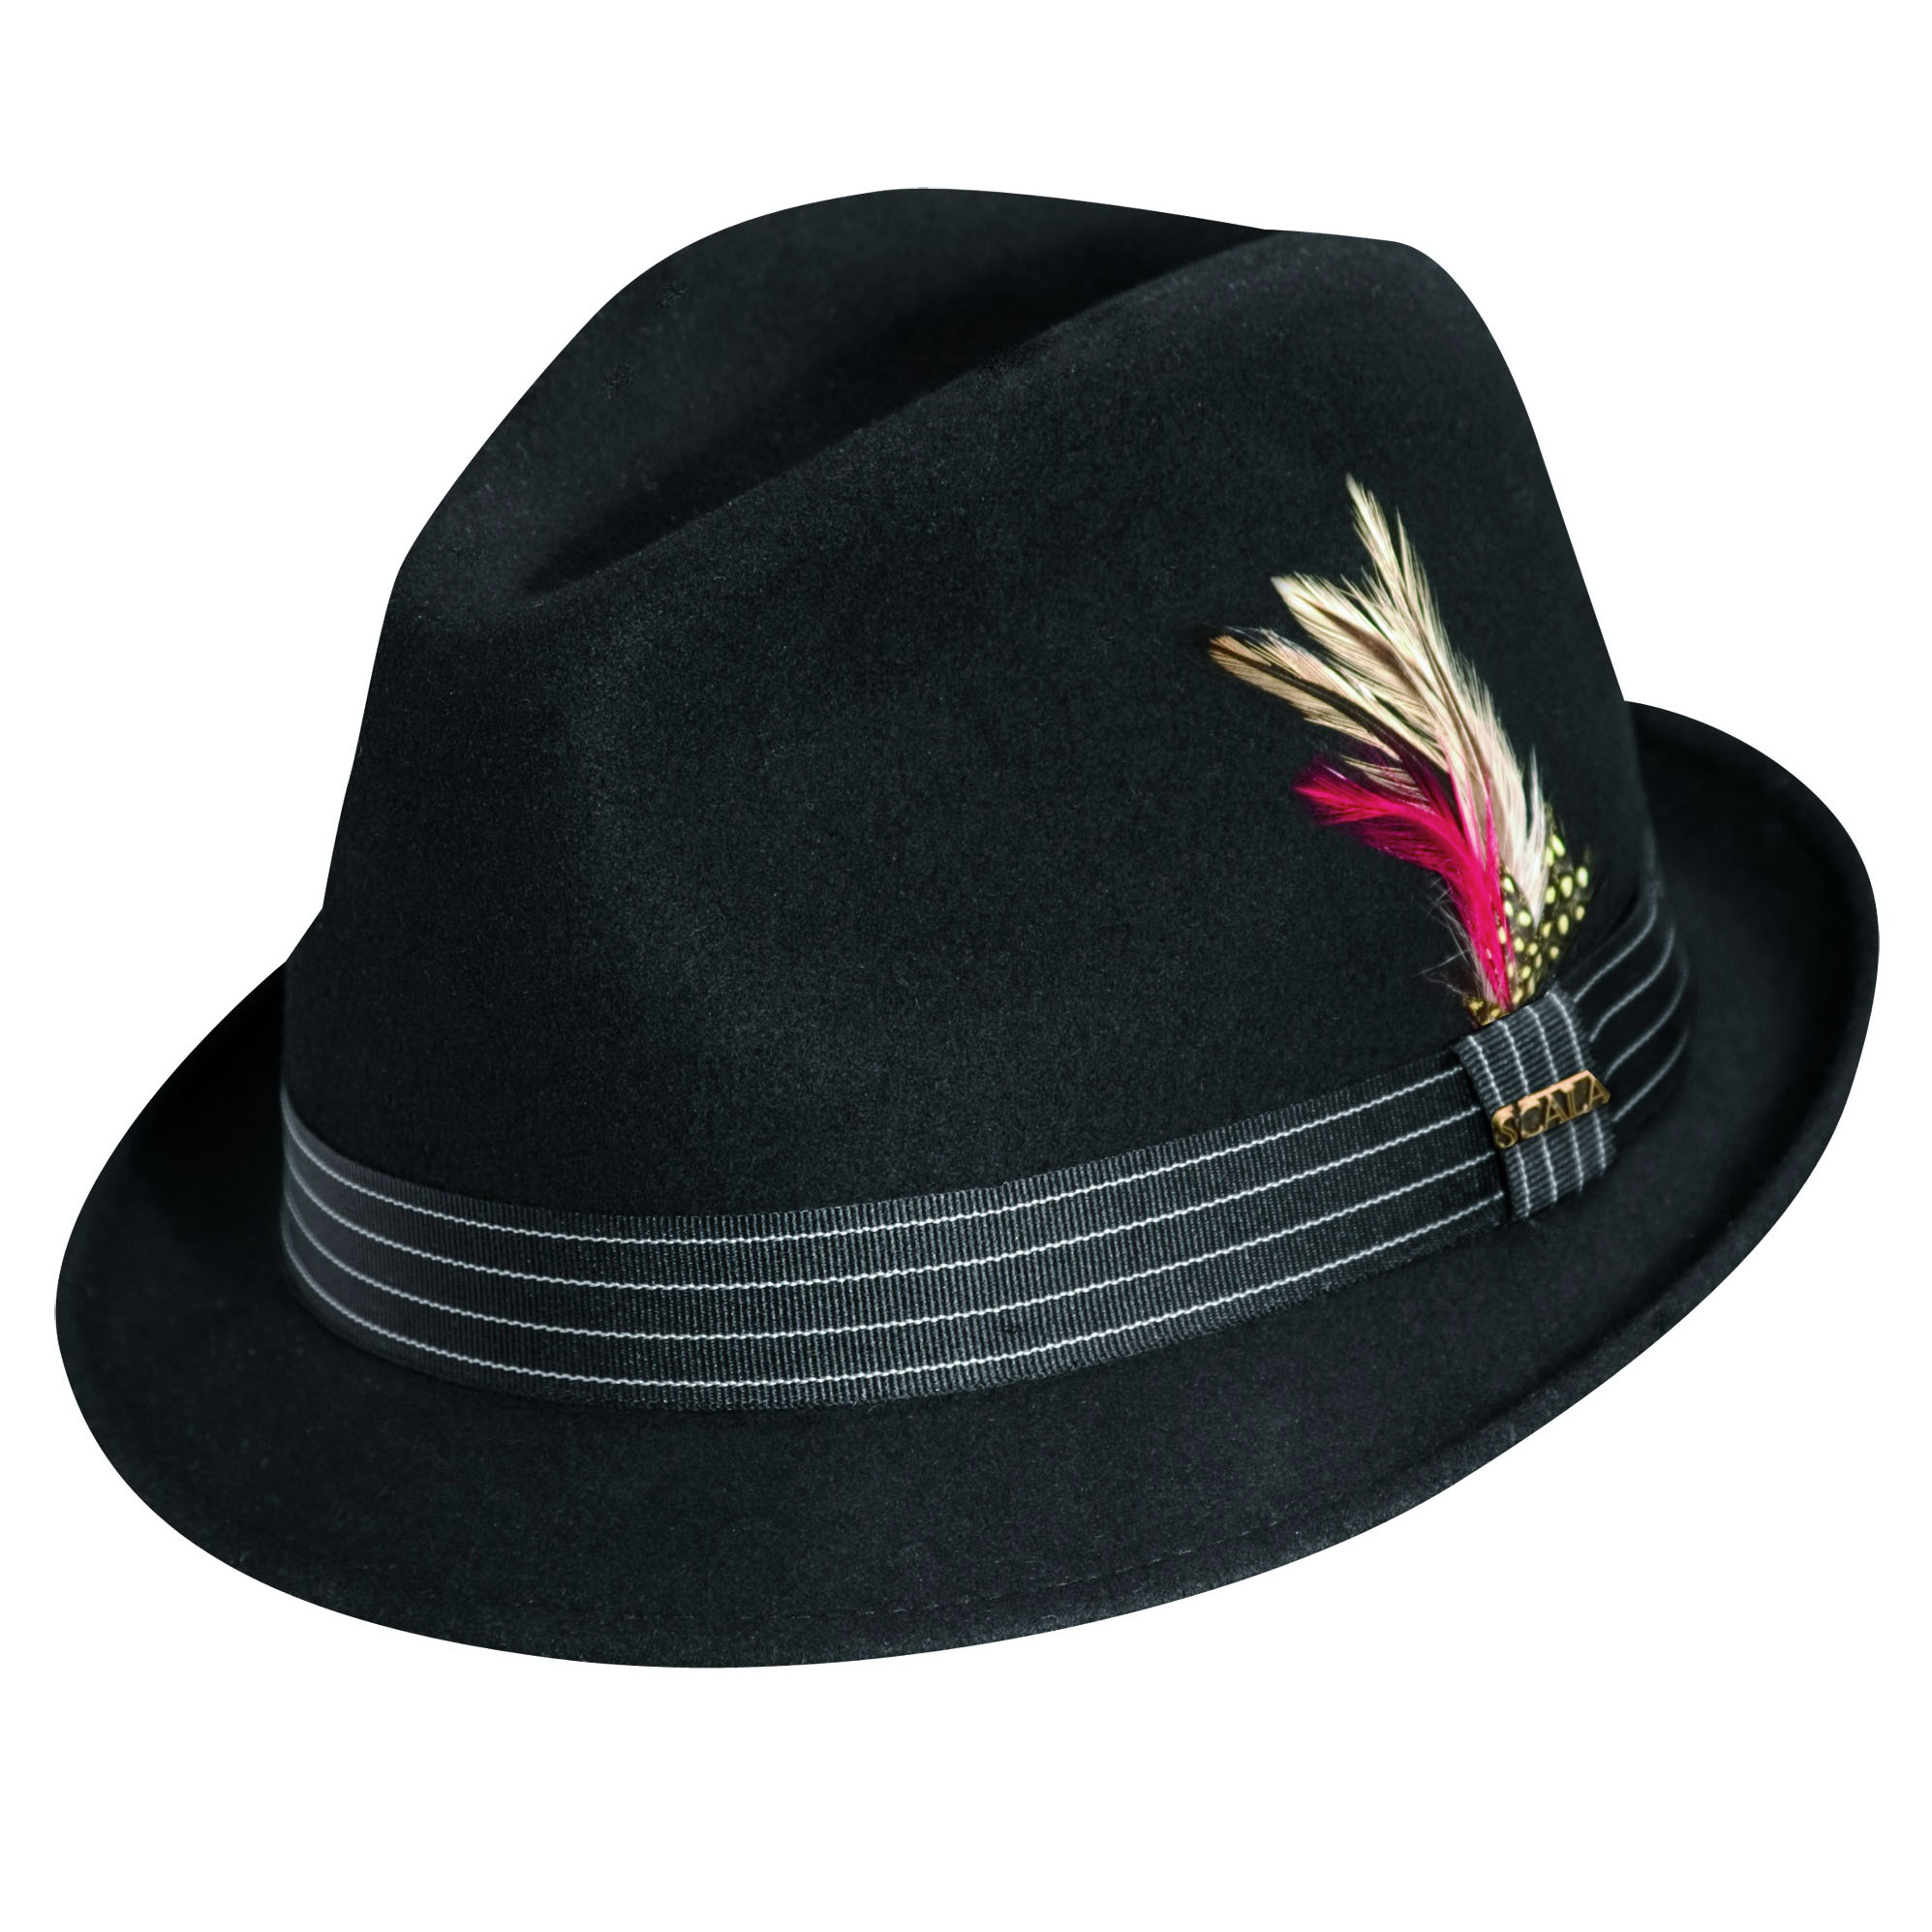 Wool Felt Fedora Hat with Feather Accent - Explorer Hats